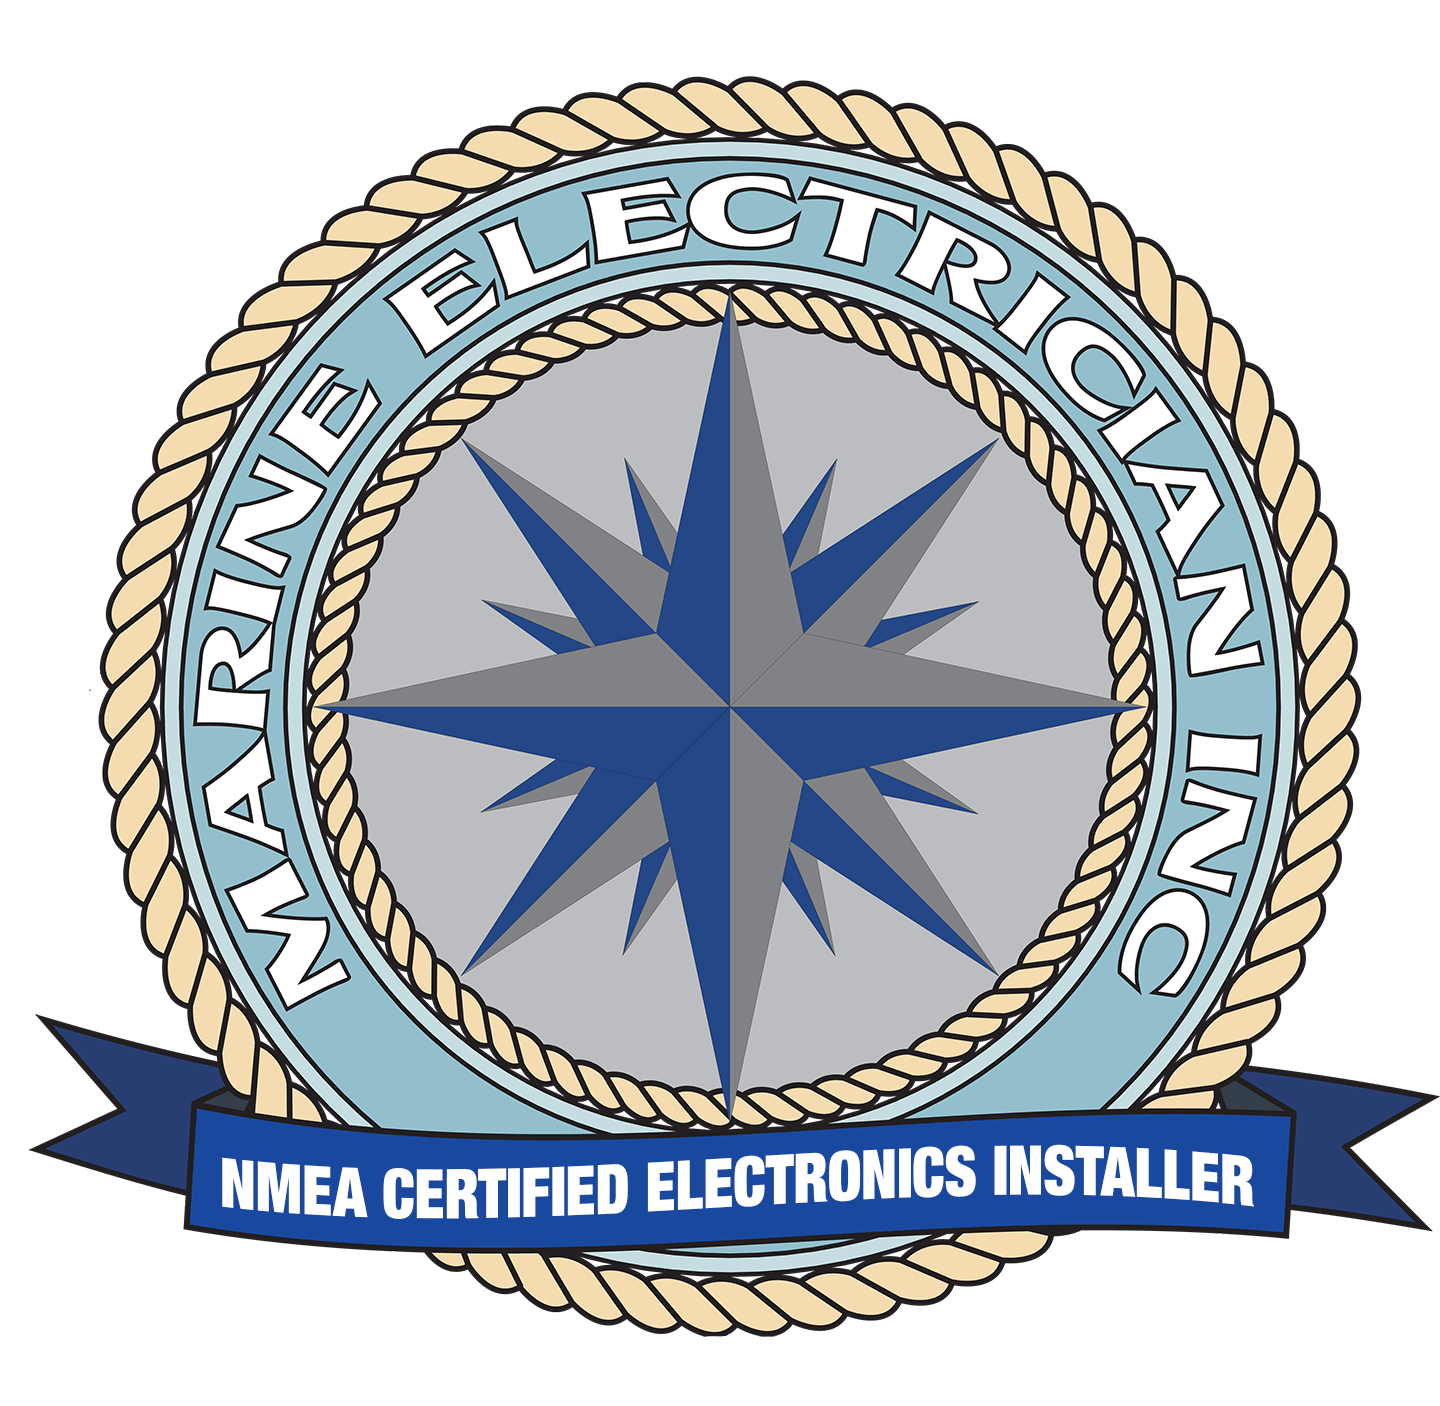 Marine Electrician Inc - Mobile Install, Repair & Services | Long Island, NY